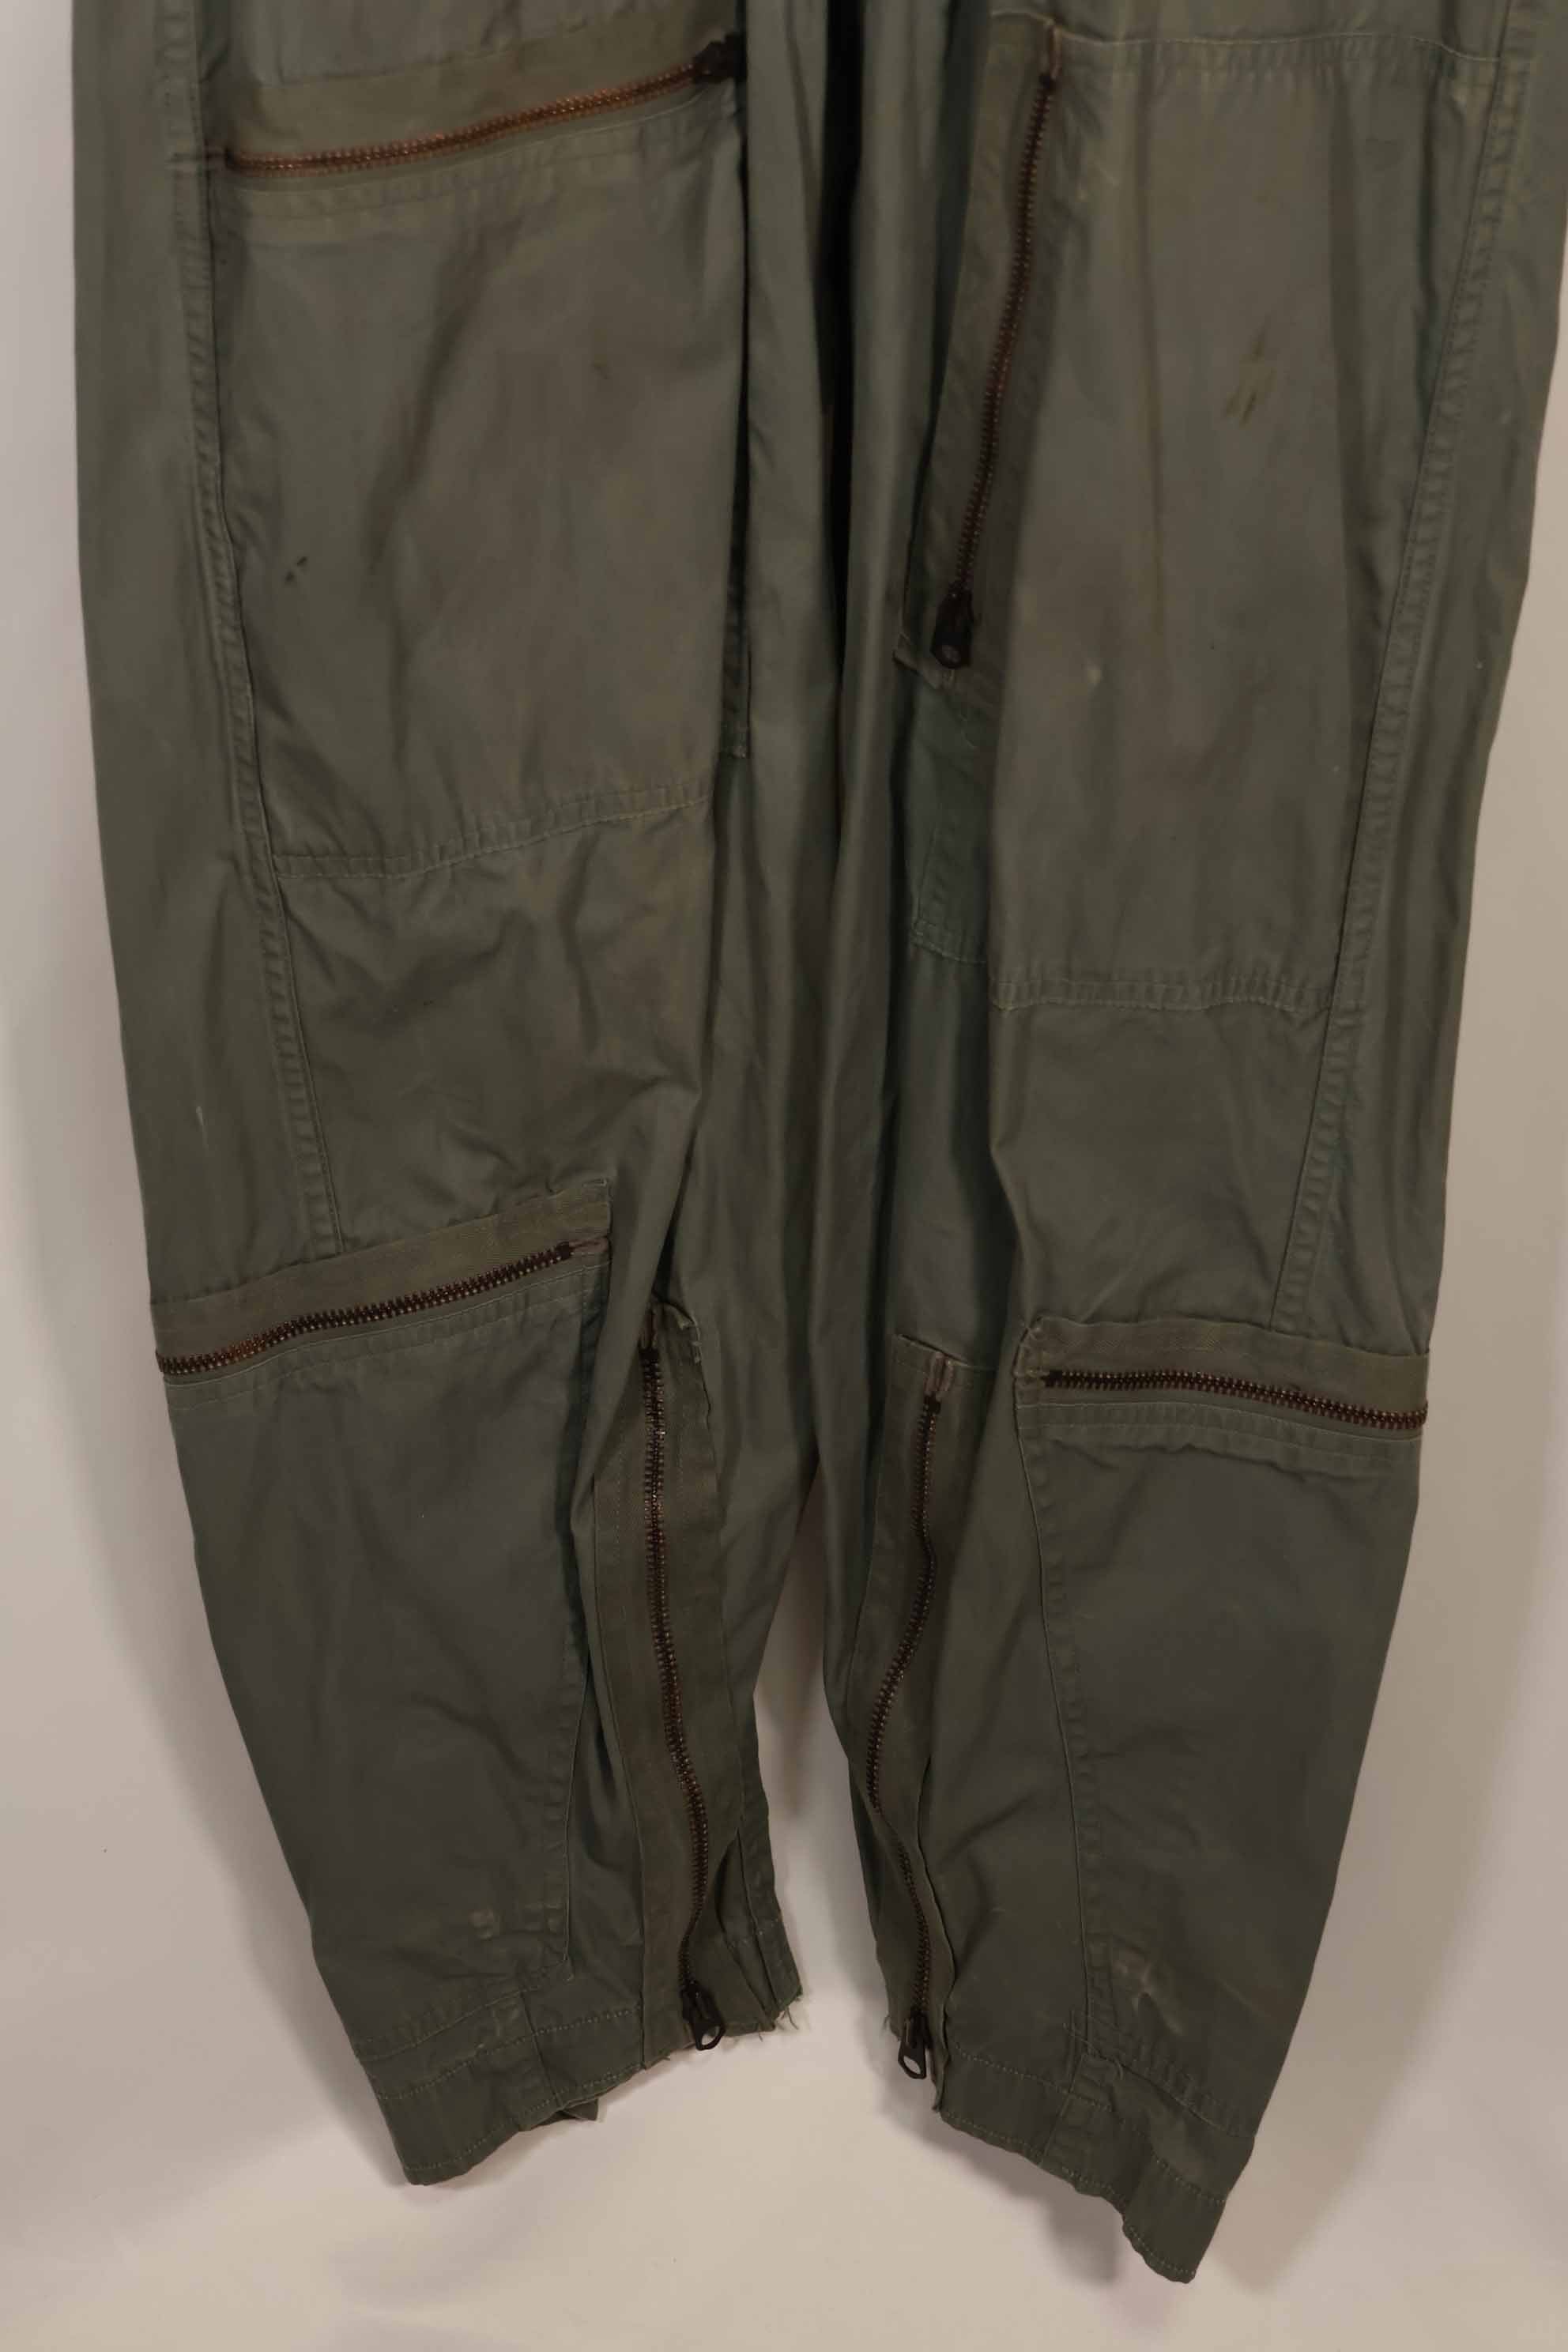 Real 1958 USAF USAF TYPE K2-B low altitude flight suit, used.